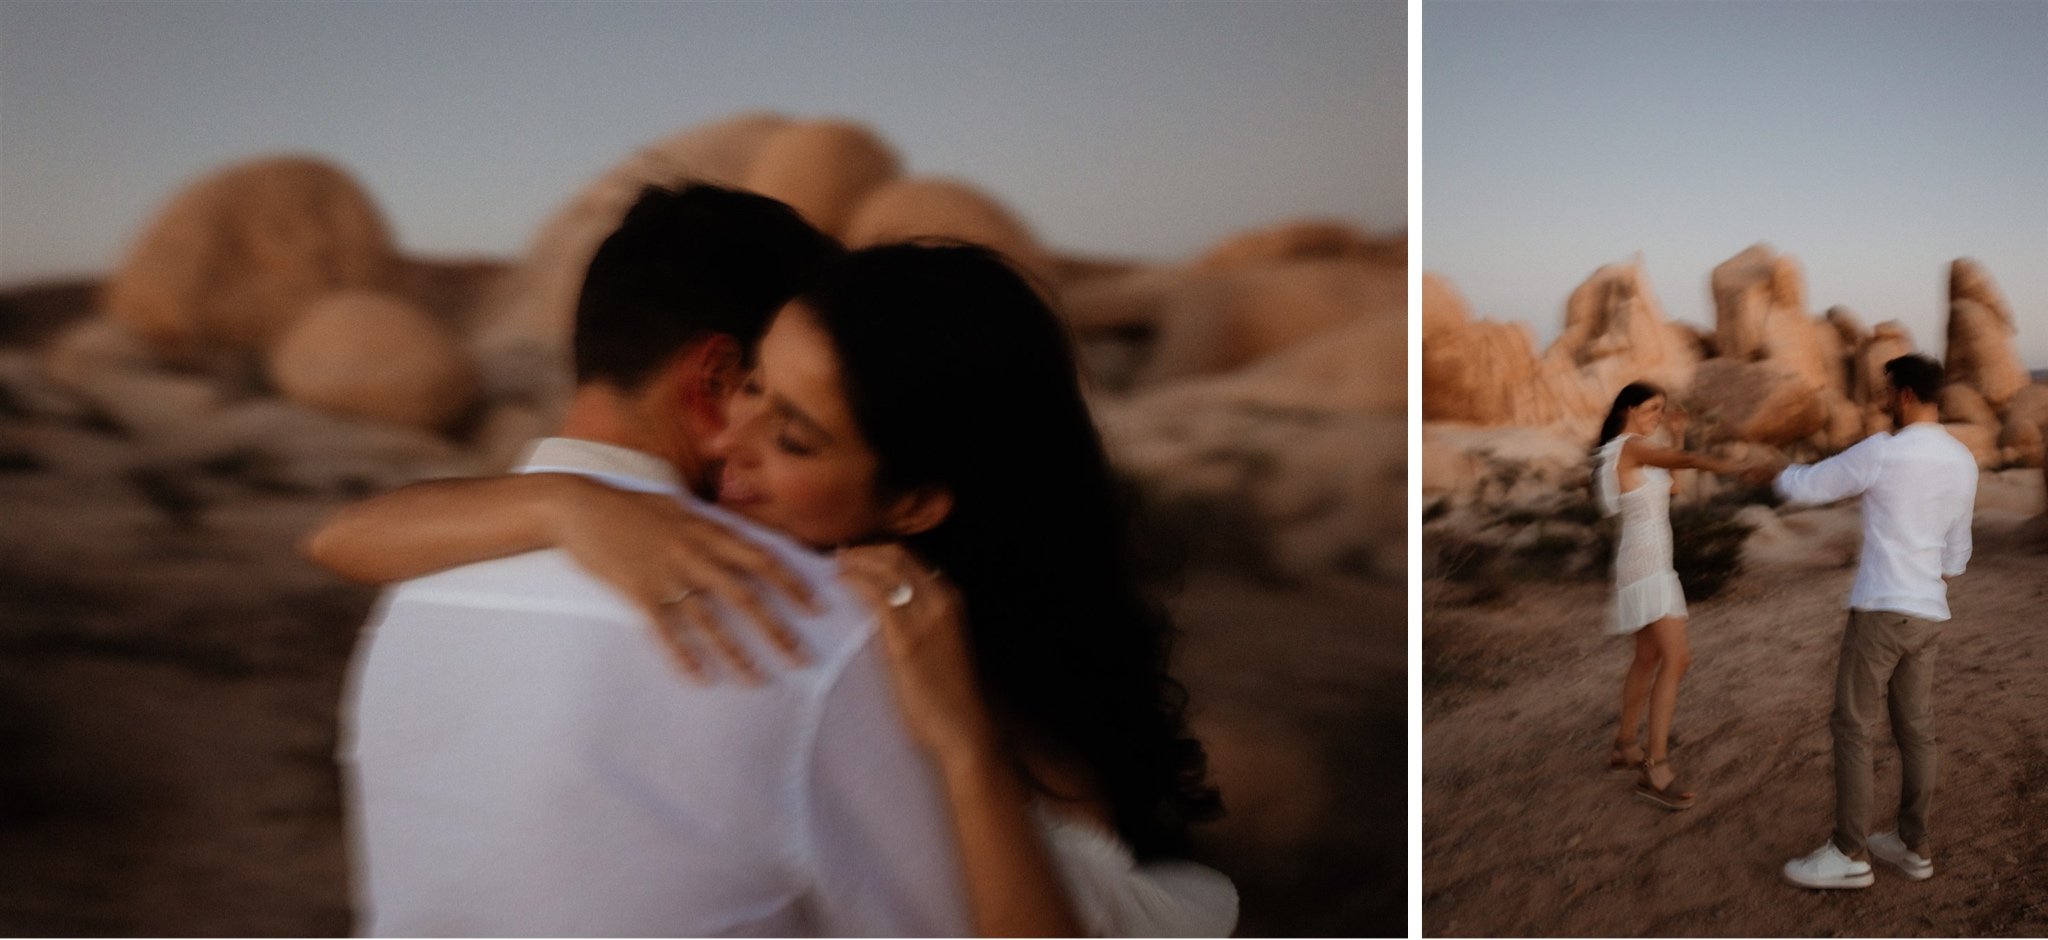 Joshua Tree Couples Session Surprise Proposal - Will Khoury Photography_53.jpg